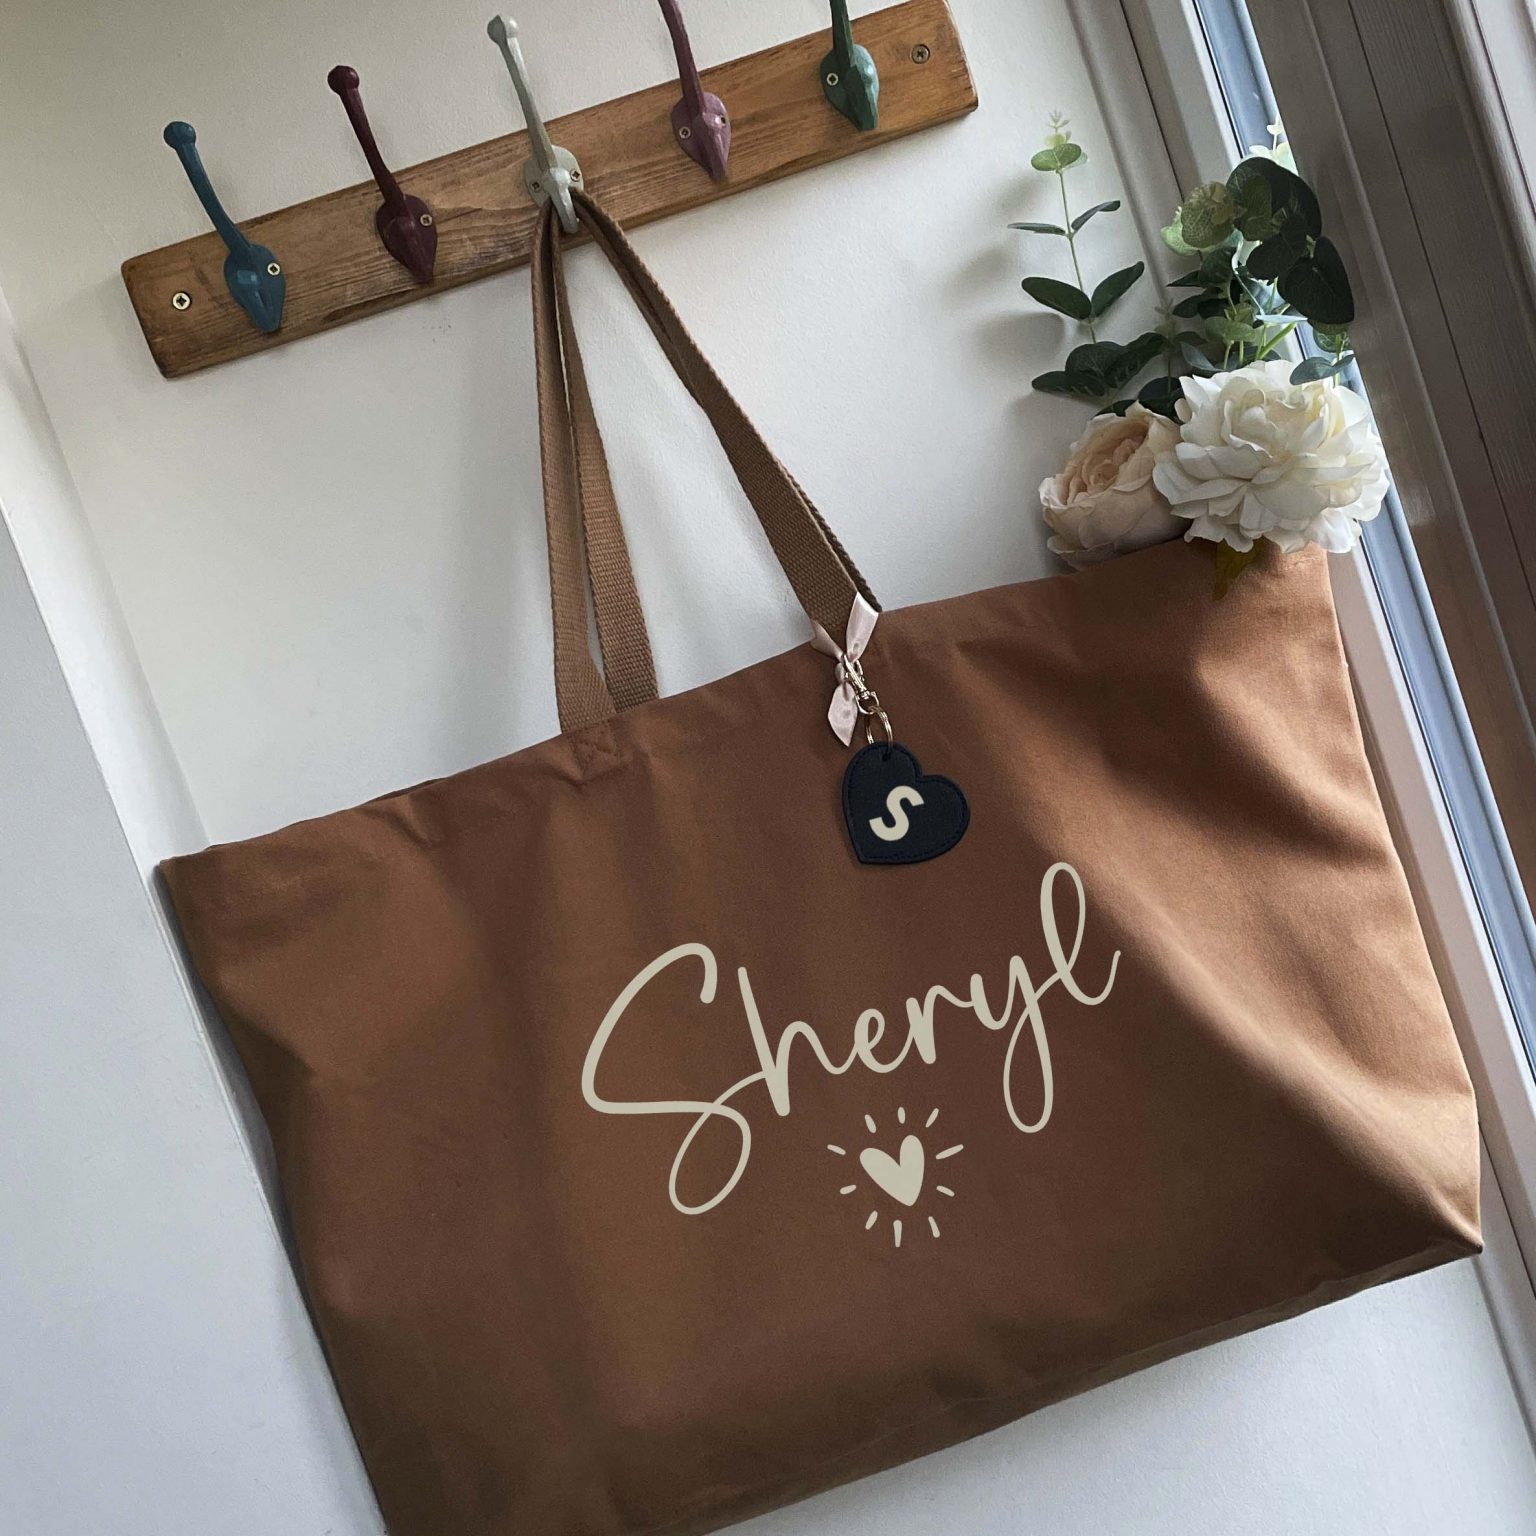 Personalised Oversized Tote Bag